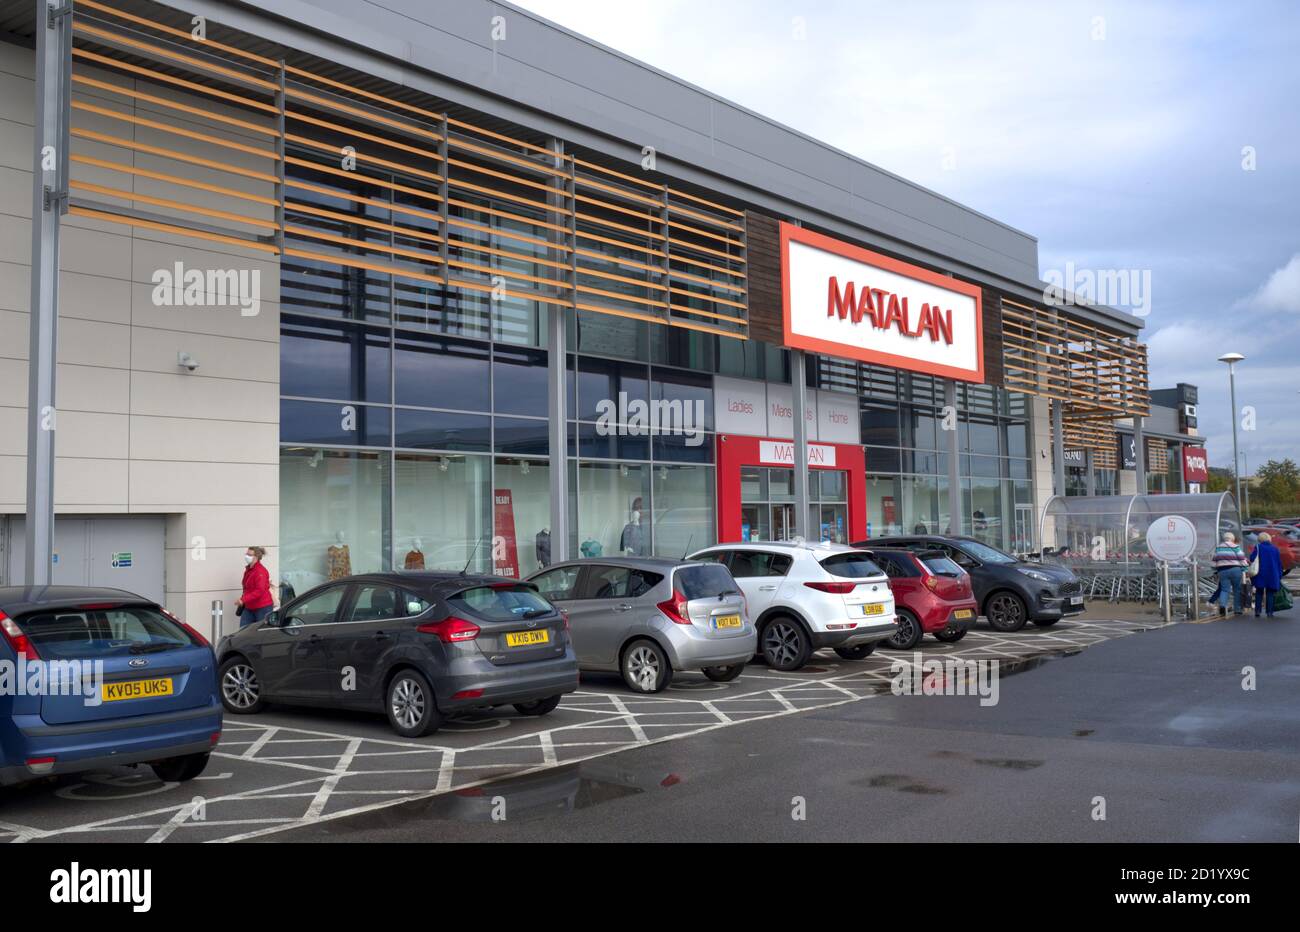 A Matalan store on the A1 retail park, Biggleswade, Beds, England Stock Photo